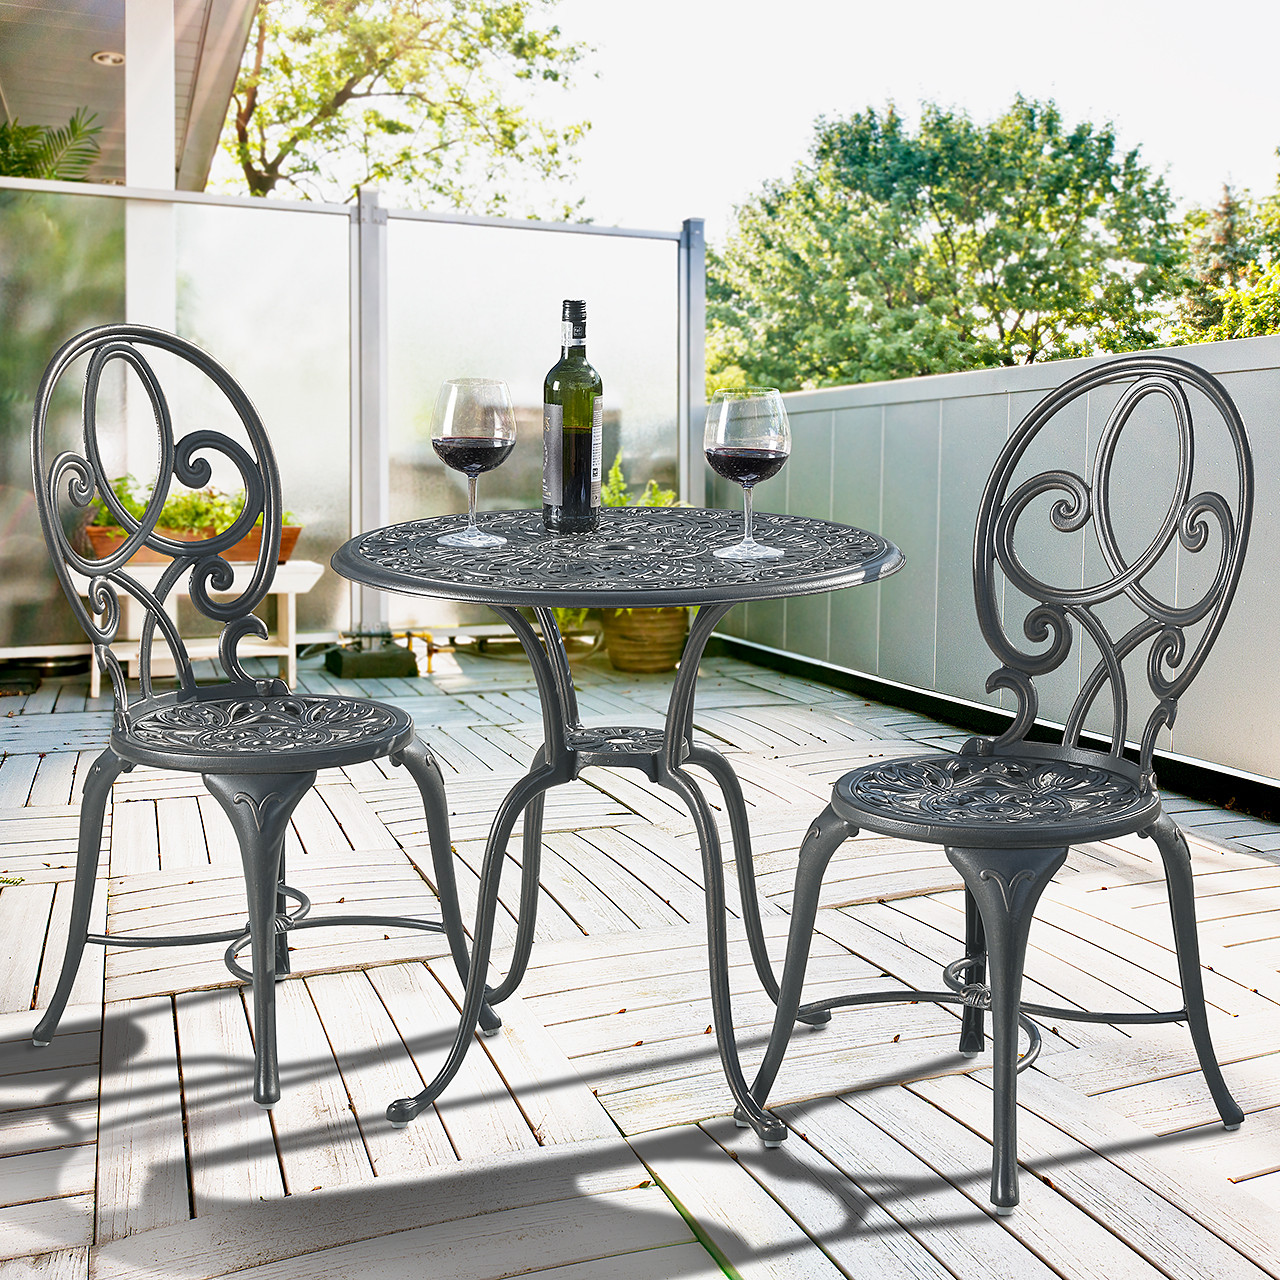 Image of Bistro set with bistro table and two daybeds